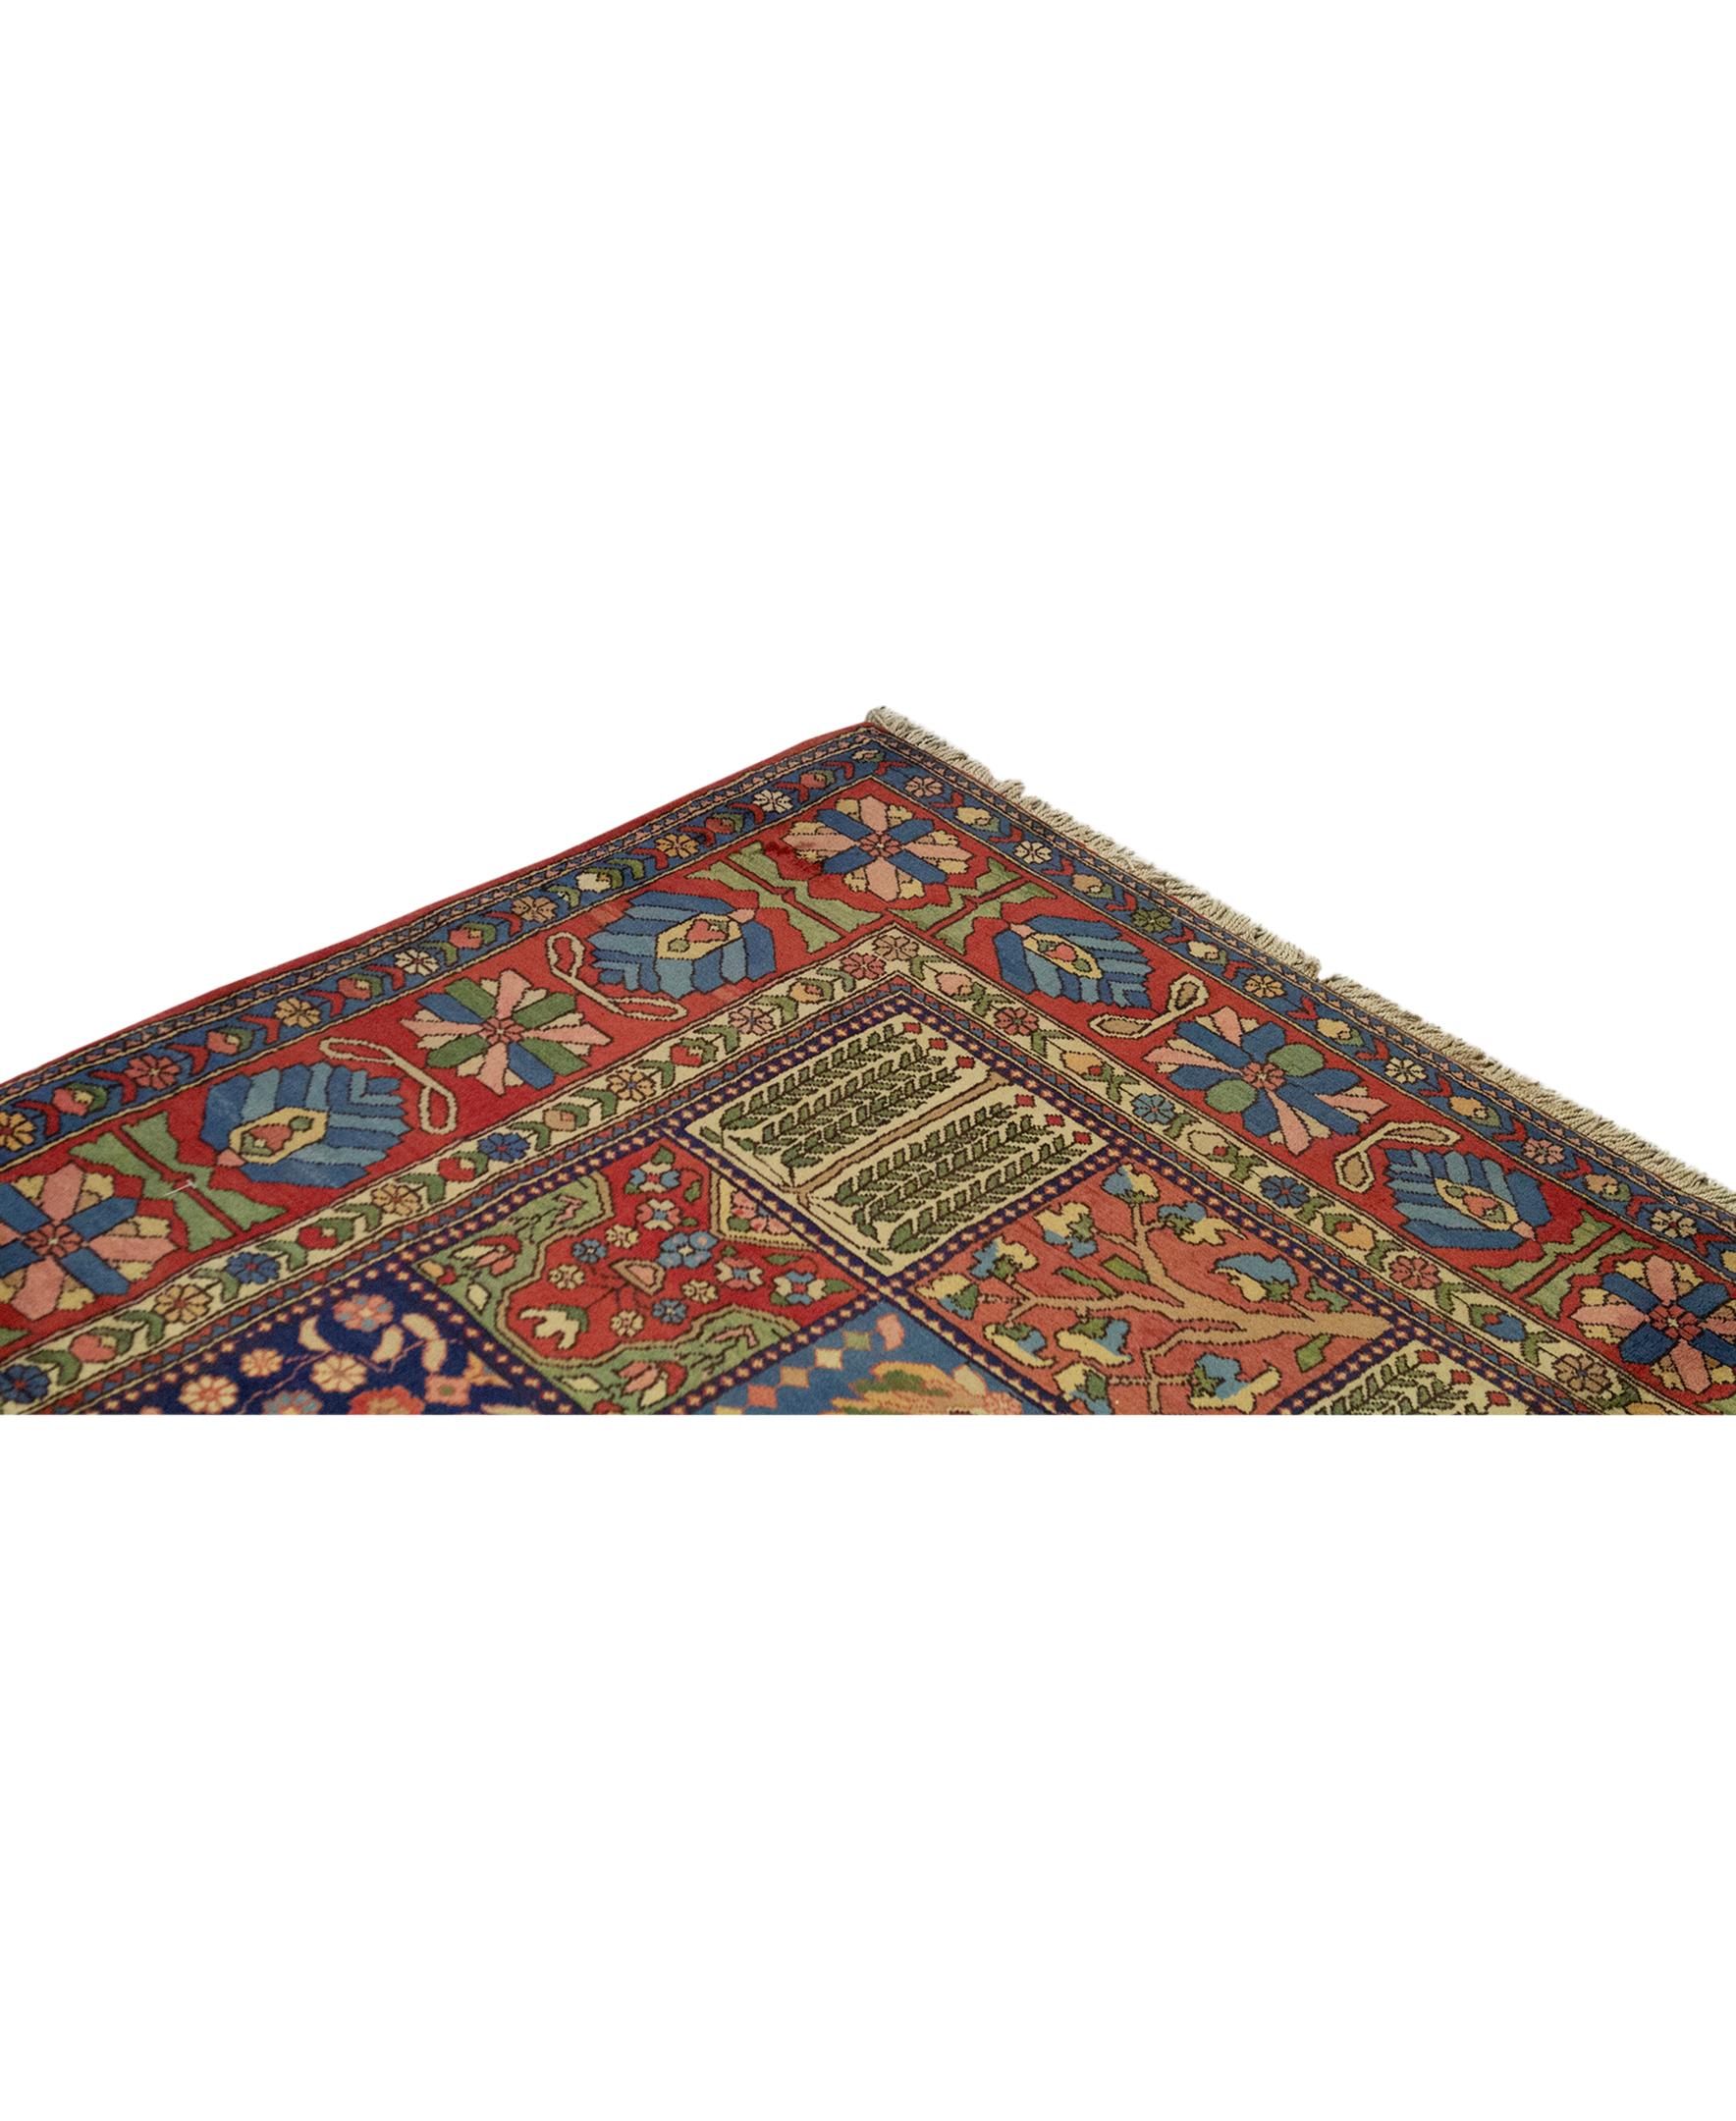 Hand-Woven   Antique Persian Fine Traditional Handwoven Luxury Wool Multi Square Rug  For Sale